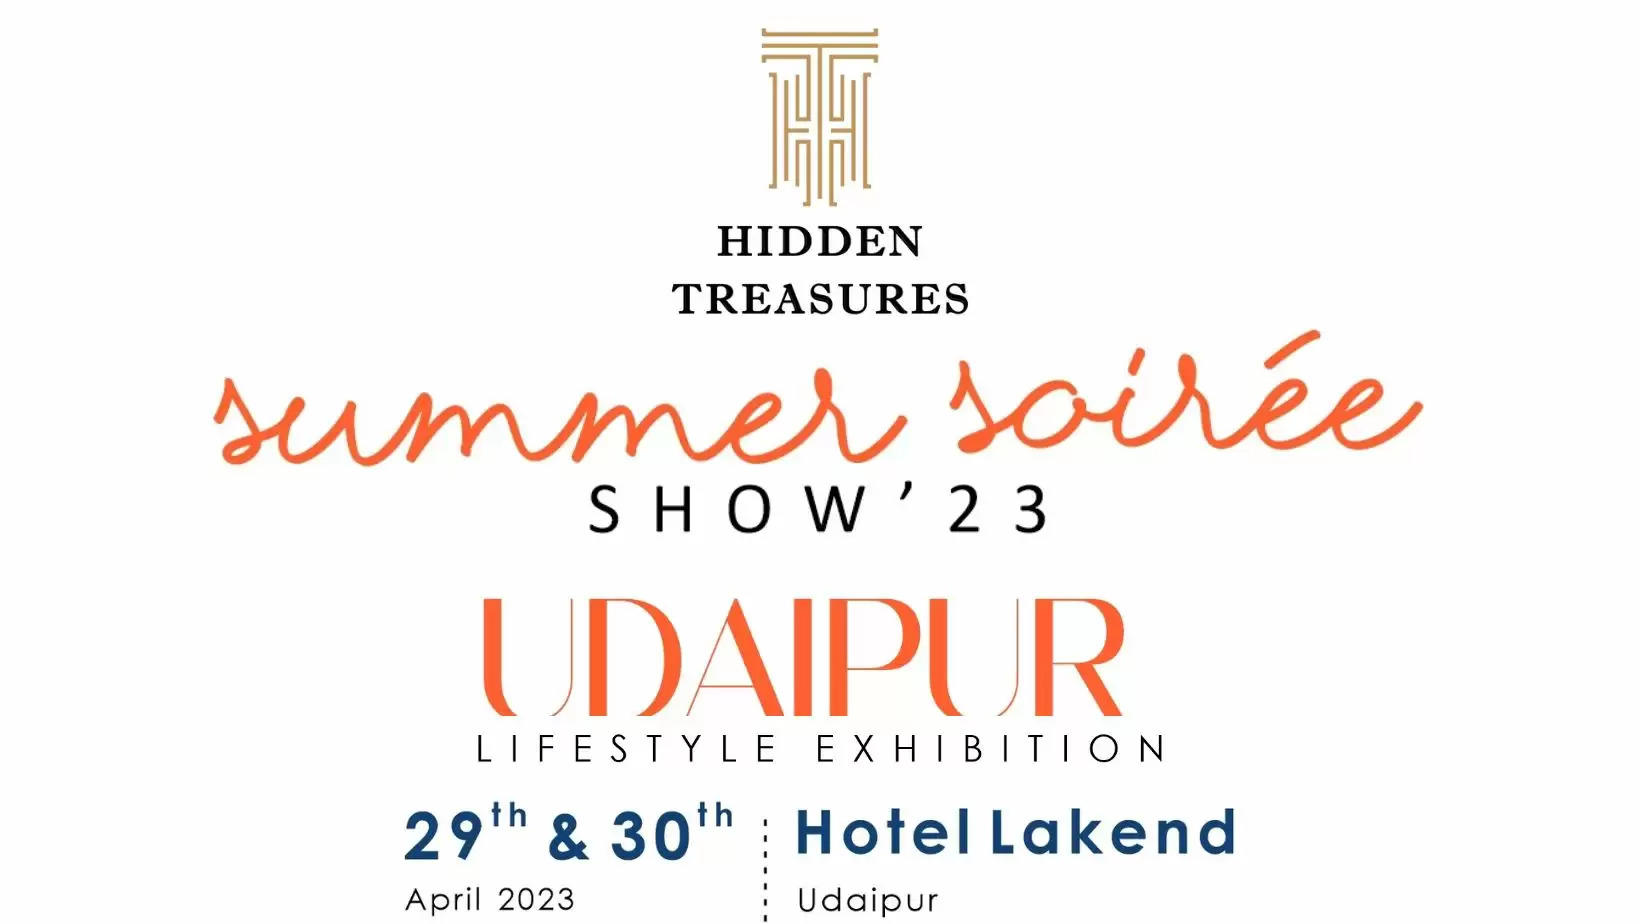 Summer Soiree Lifestyle Exhibition Hidden Treasures Events in Udaipur Hotel  Lakend